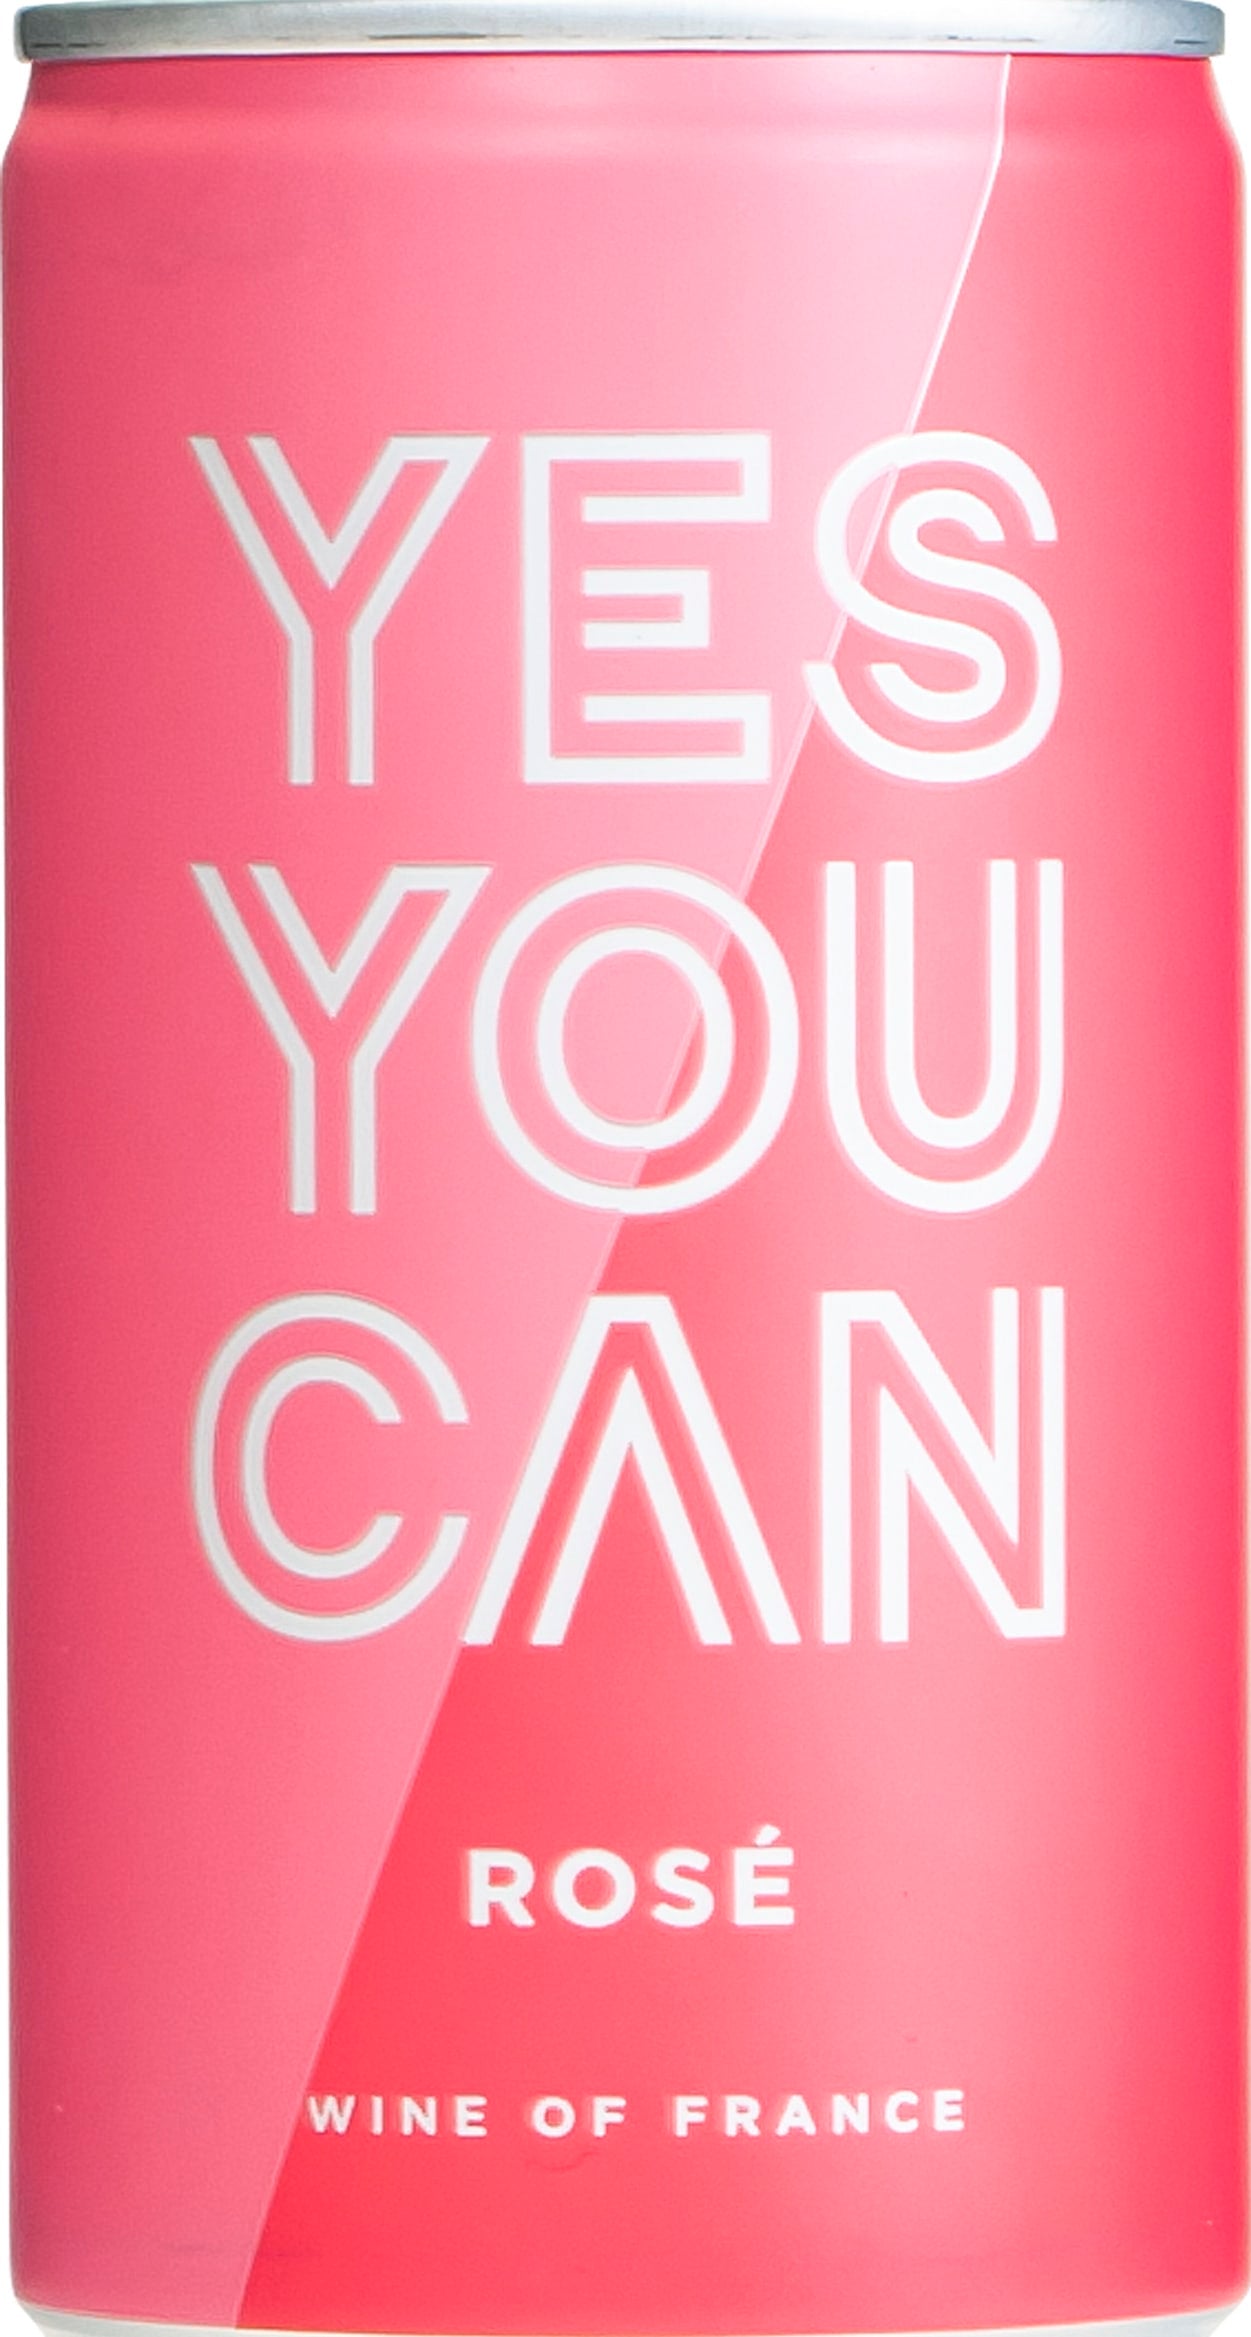 Rose CAN 22 Yes You Can 24/187 18.7cl - Buy Yes You Can Wines from GREAT WINES DIRECT wine shop